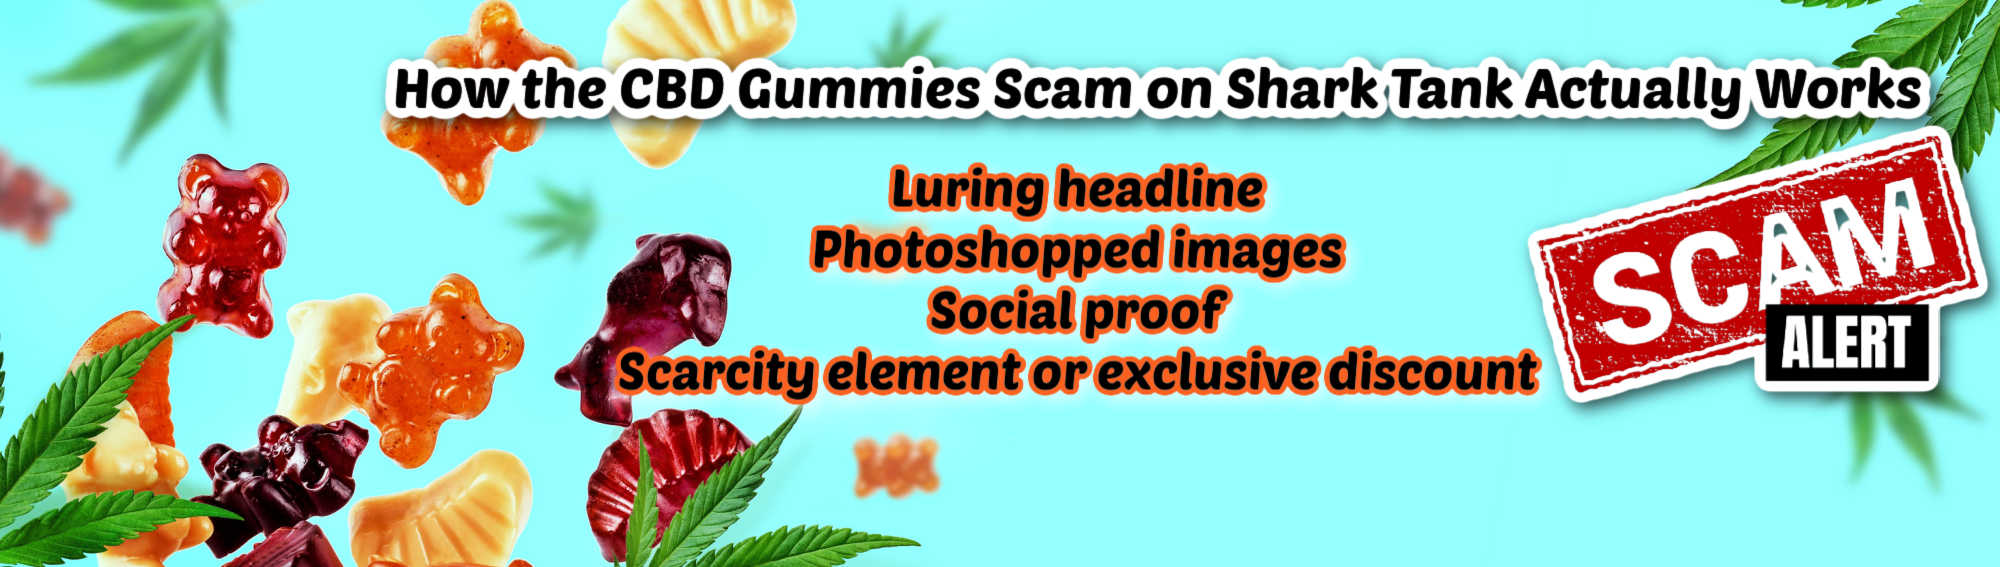 image of how cbd gummies scam on shark tank actually works